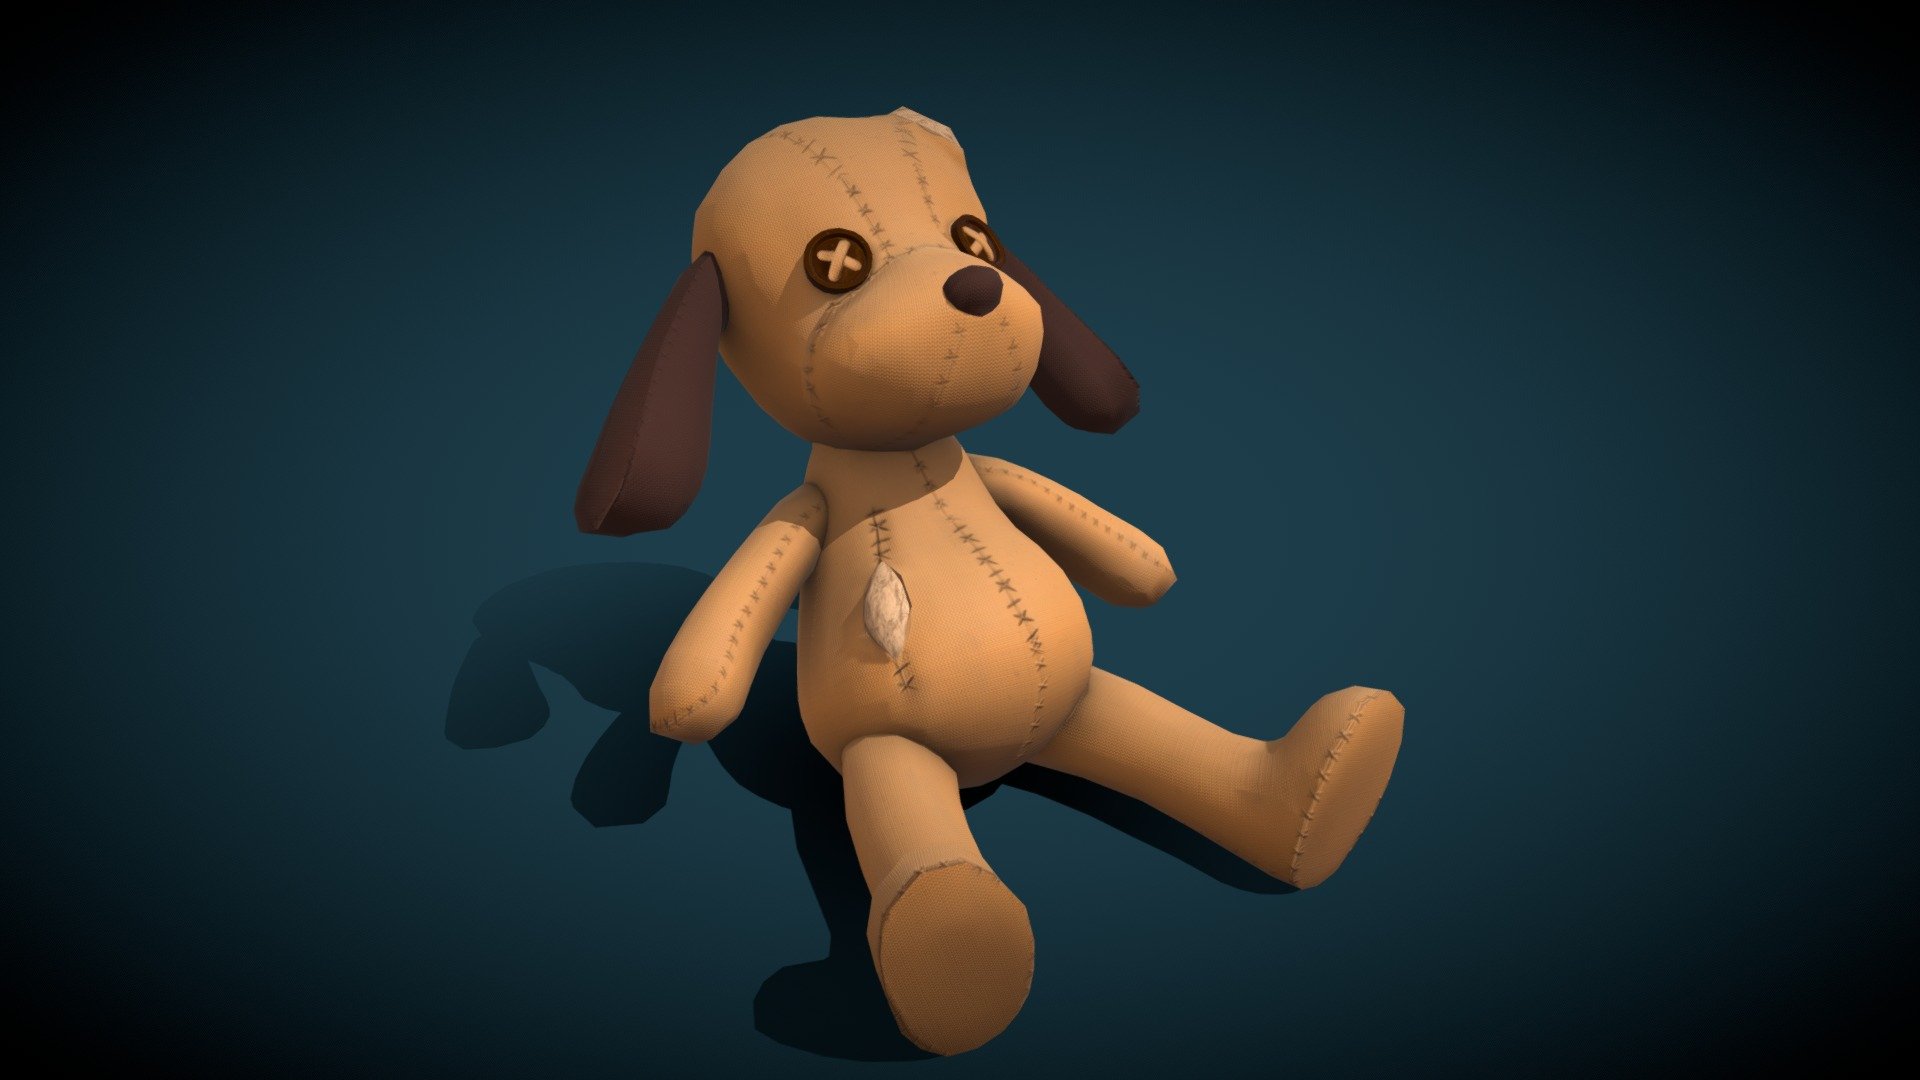 A toy for a horror game

An old broken toy

Low Poly - Game Ready

Tris - 3270

Verts - 1679
 - Toy_dog - 3D model by asisyayka 3d model